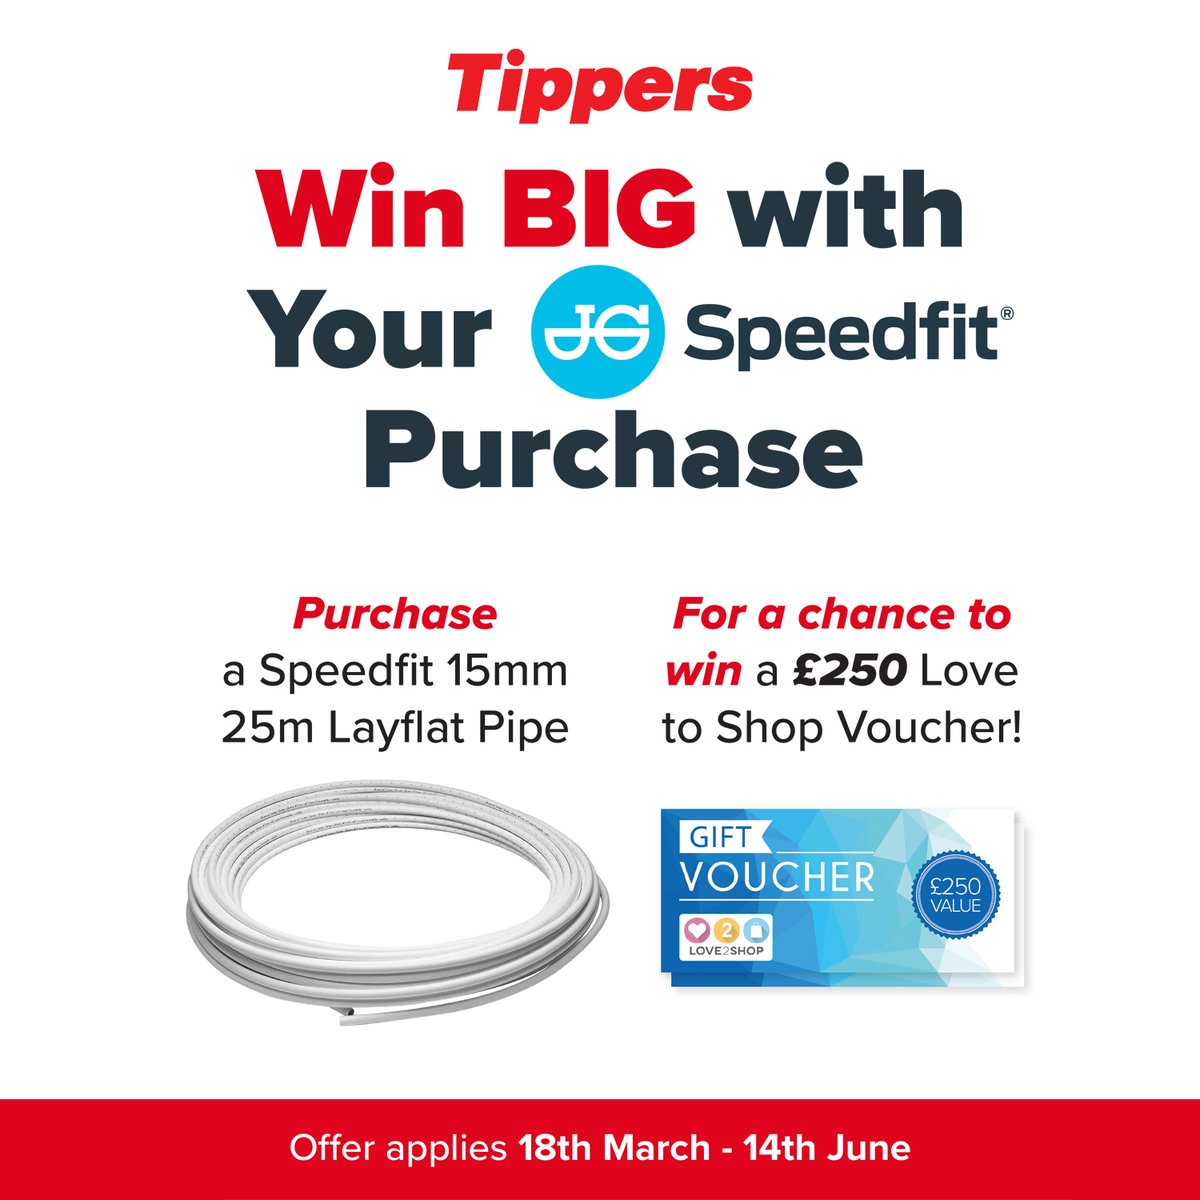 ⭐ Win Big with Tippers & Speedfit! ⭐ Purchase Speedfit 15mm 25m Layflat Pipe (JG15BPB25C) for a chance to win a £250 Love to Shop Voucher! Buy from your local branch or online: tippers.com/products/speed…